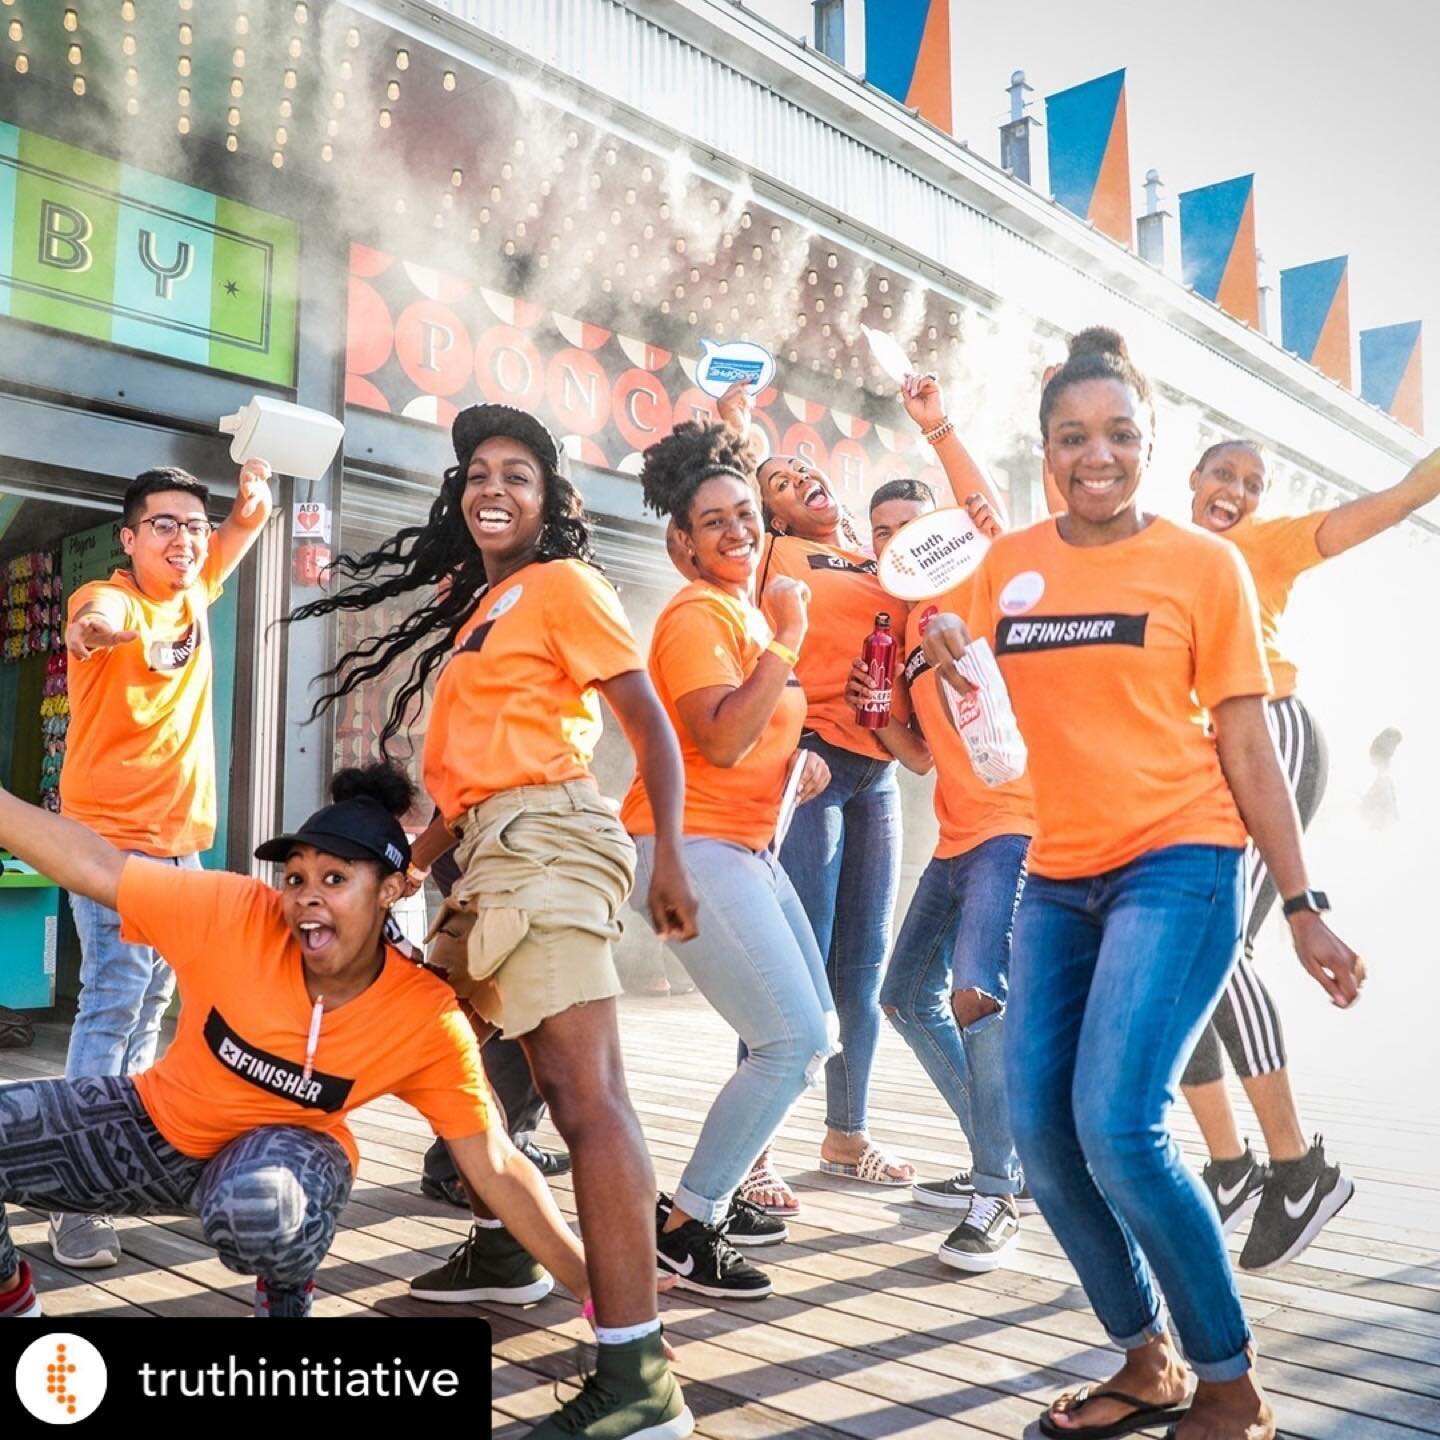 @truthinitiative @truthorange is looking for 10 young adults to further the movement to end smoking for good and become 2021 truth Ambassadors. If you or someone you know is interested in addressing tobacco, the deadline to apply is Jan 31! Link in @